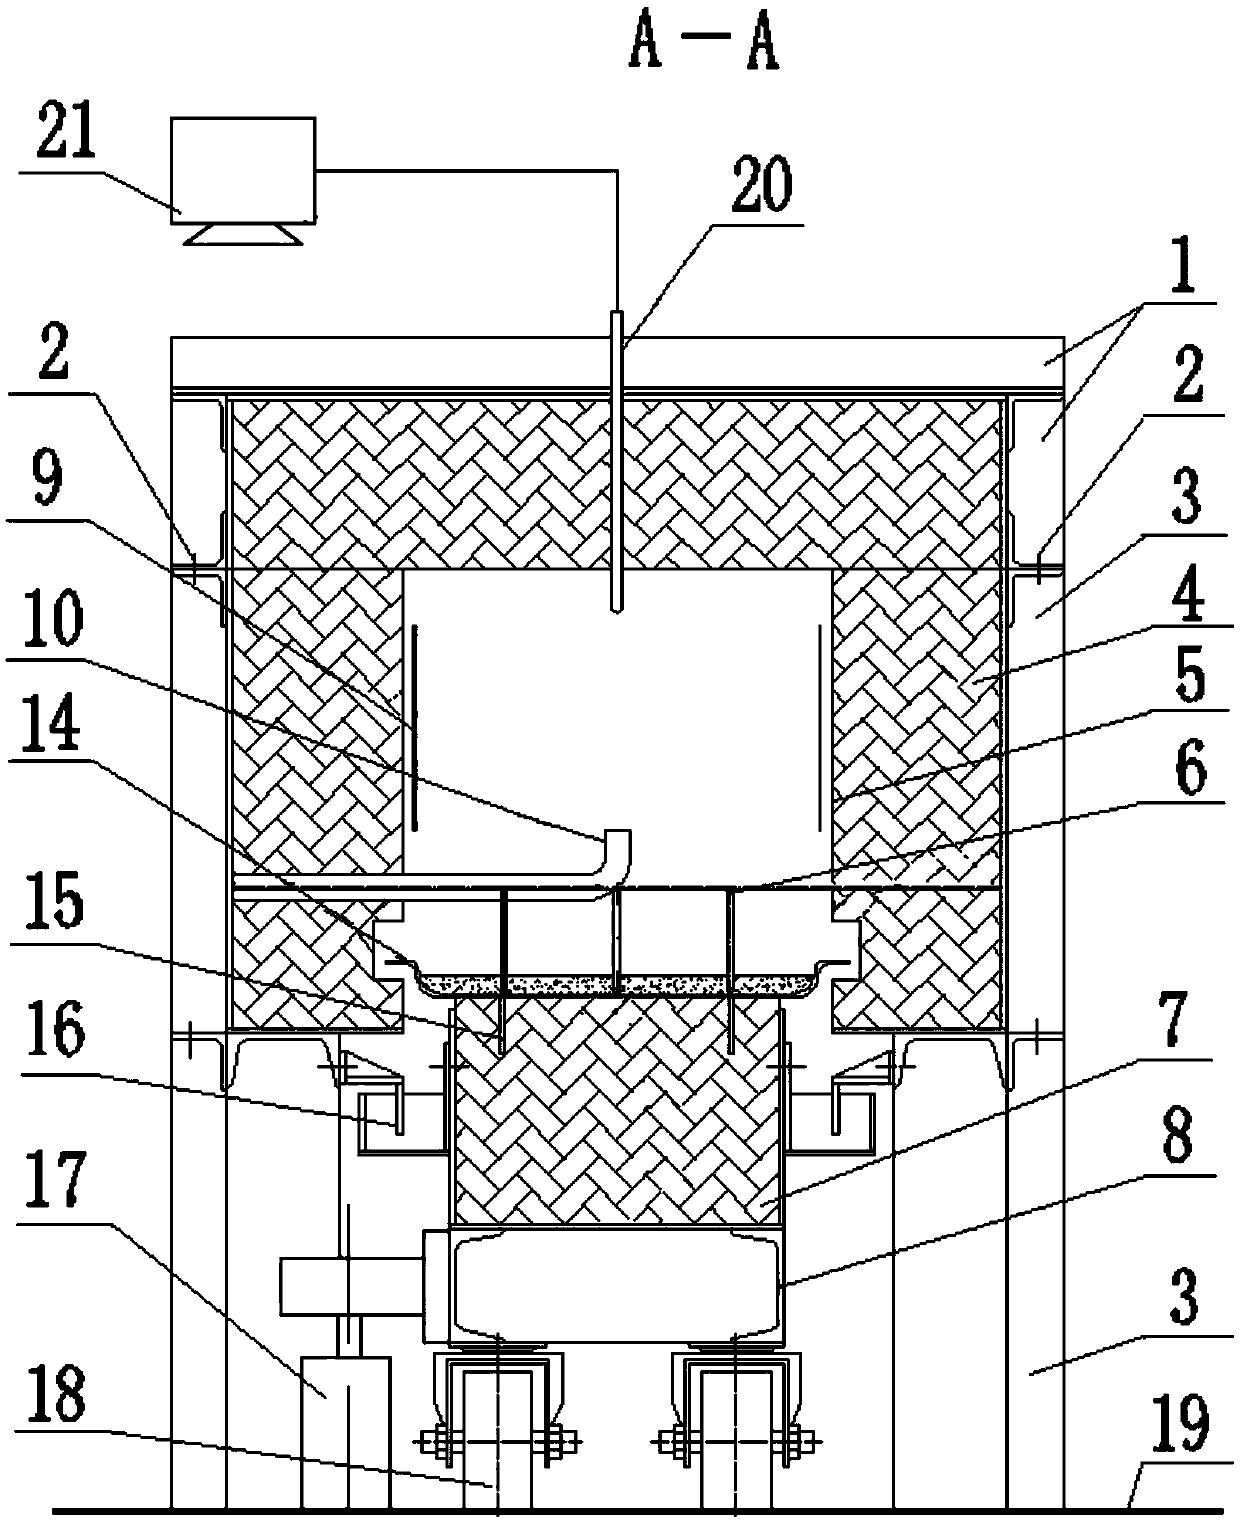 Annular fixed bed combustion furnace applied to powder materials